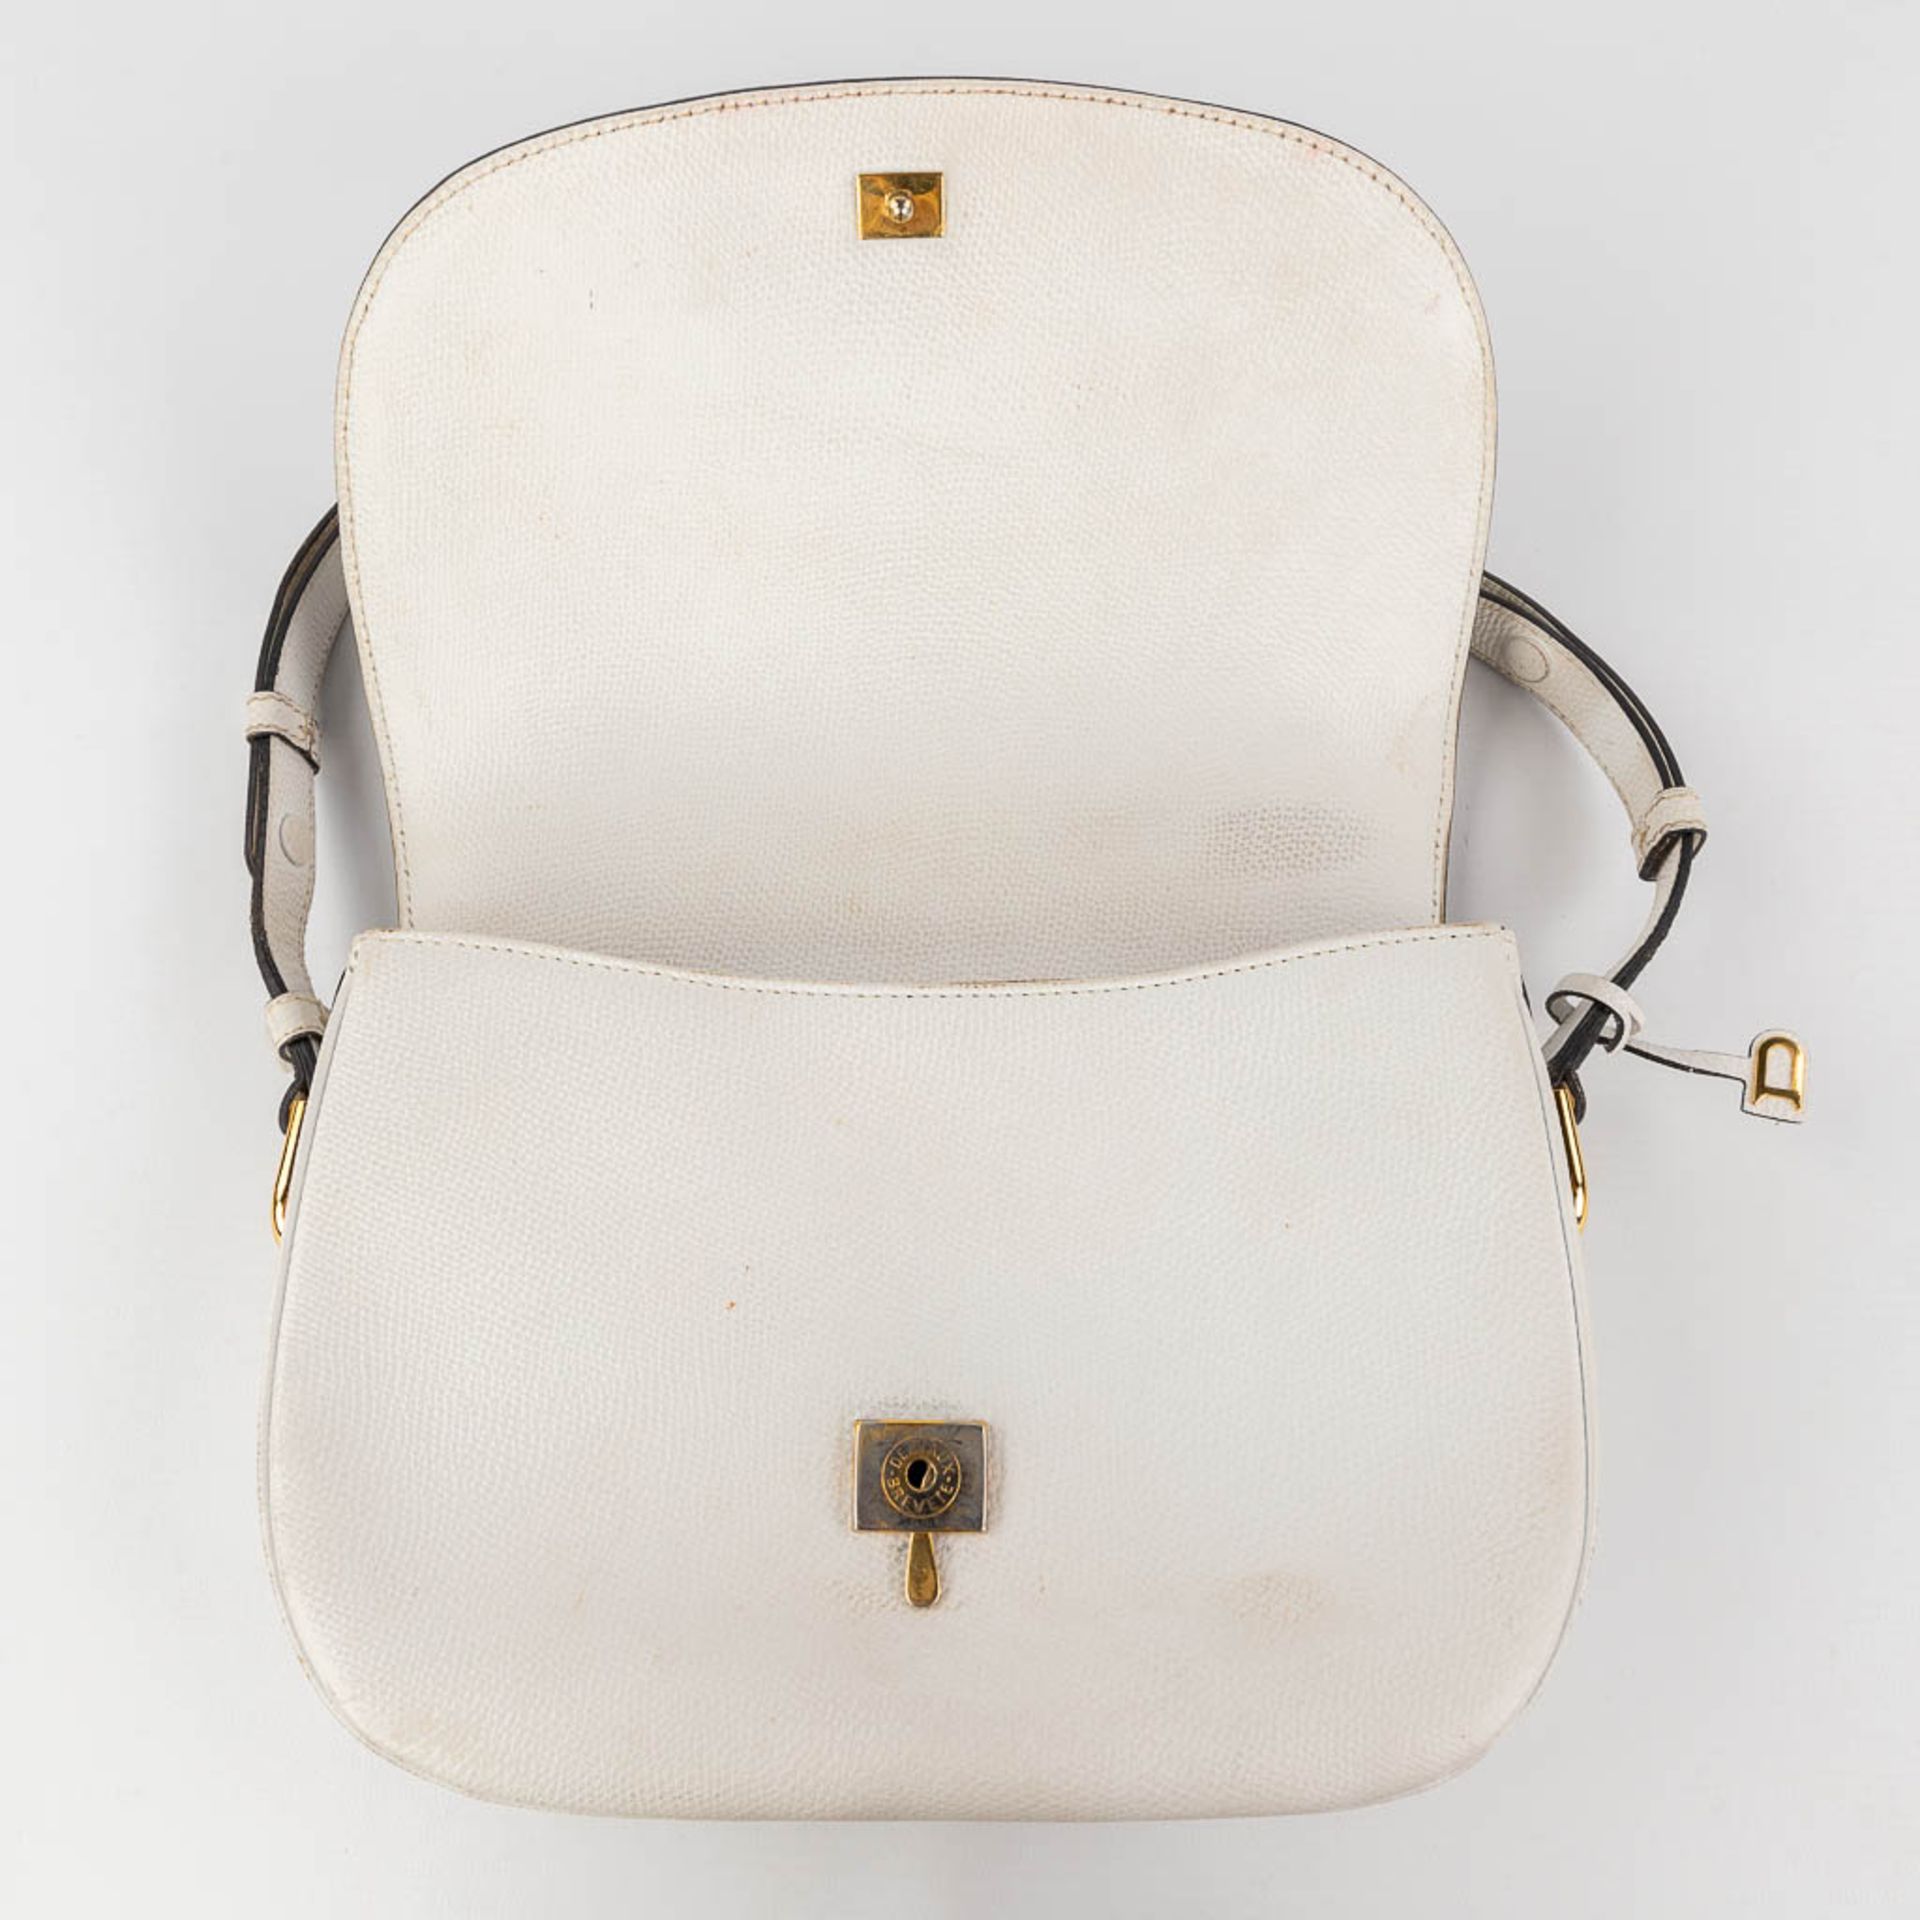 Delvaux, a handbag made of white leather with gold-plated elements. (W: 26 x H: 19 cm) - Image 17 of 19